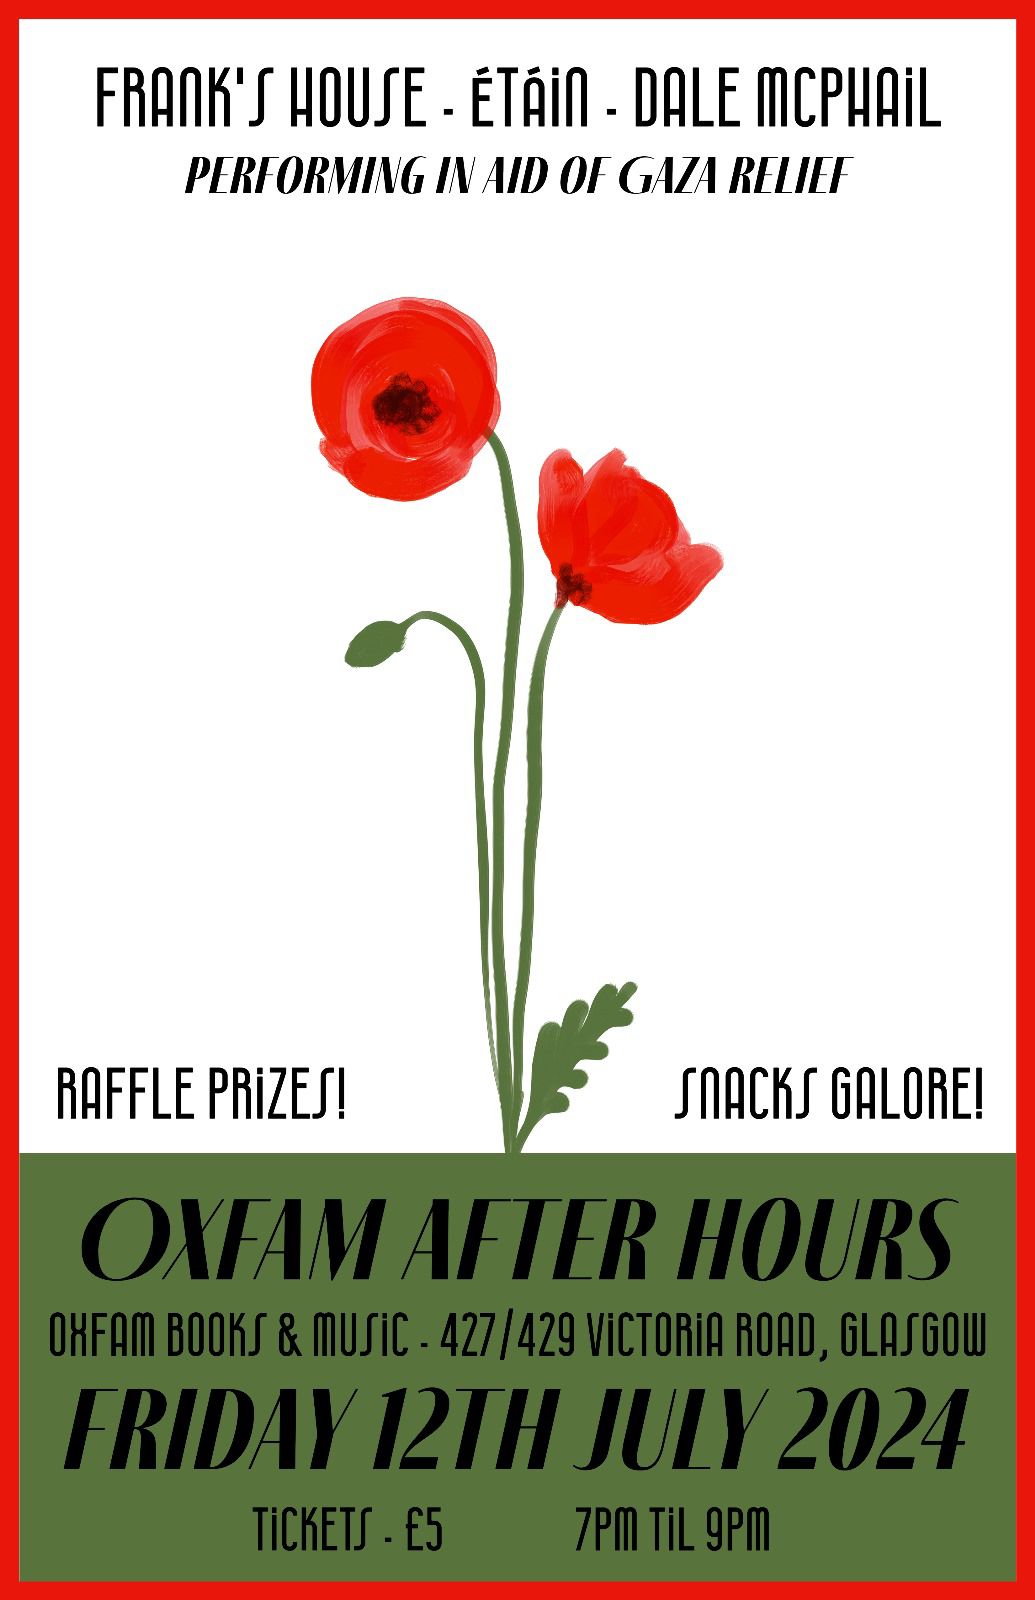 Oxfam after hours event flyer